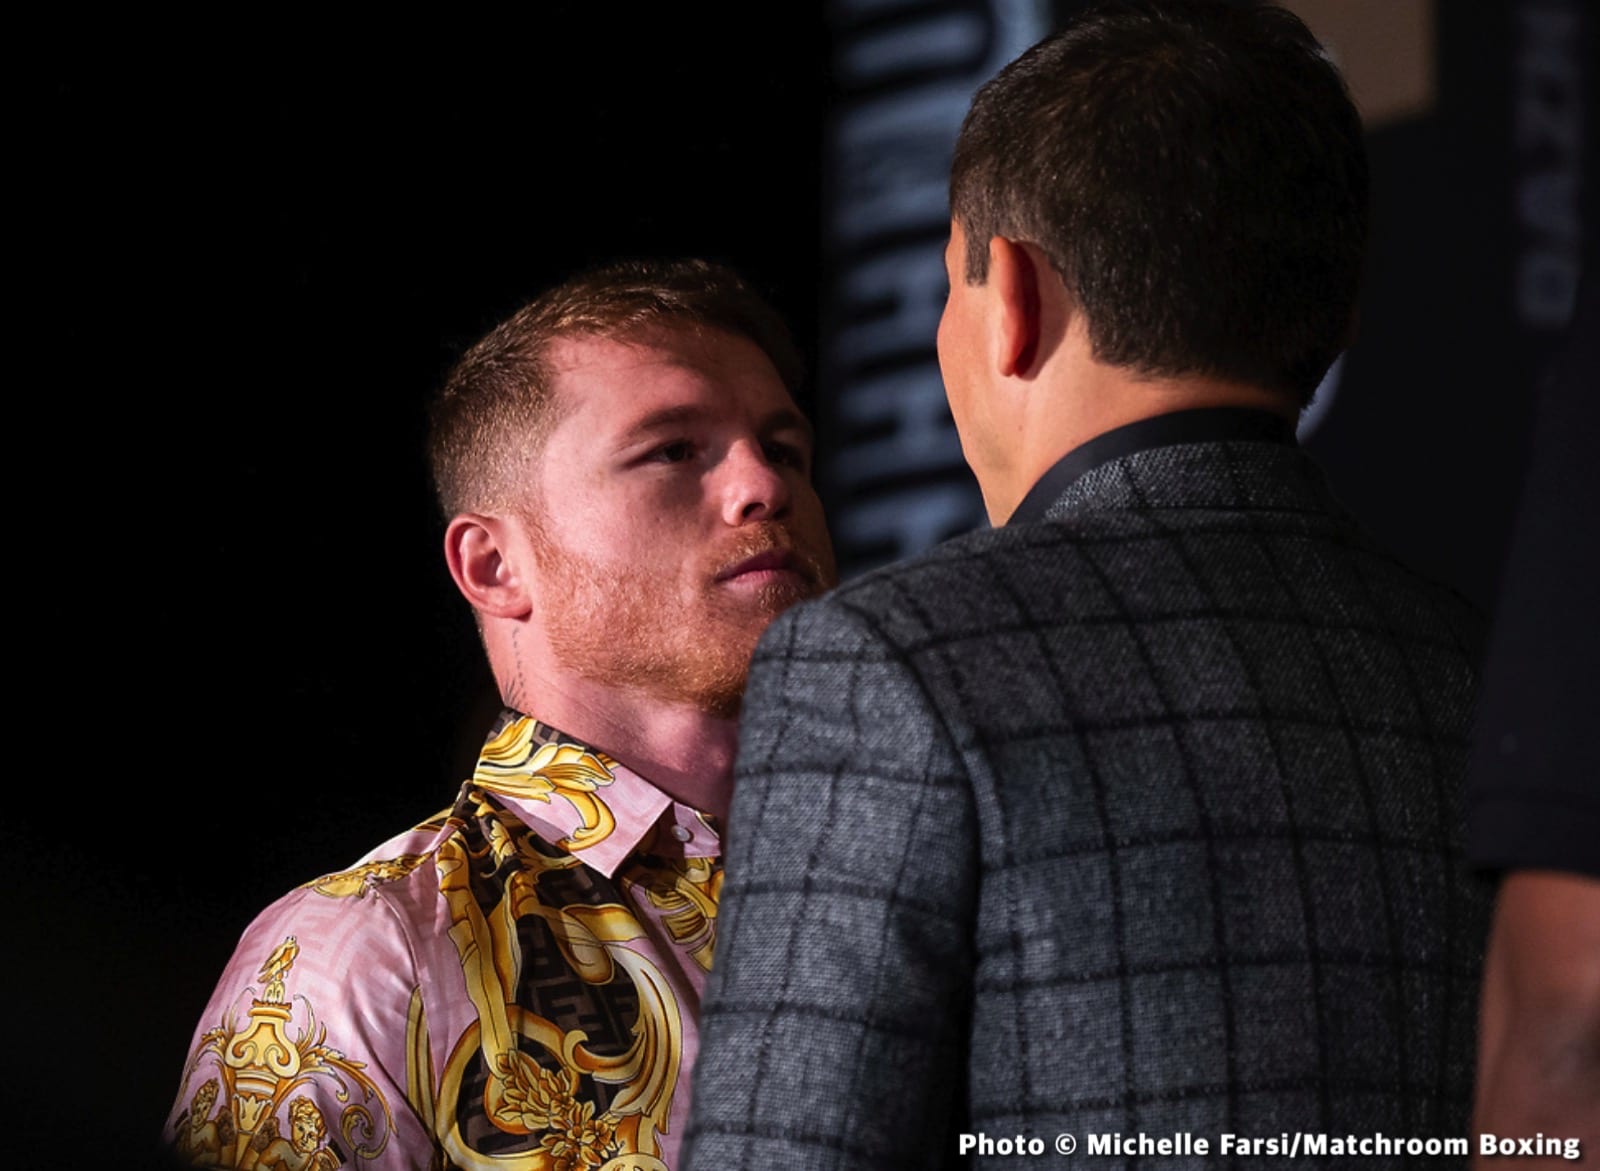 Image: Canelo reacts to Ryan Garcia picking Golovkin to win: "Win a world title, then talk"